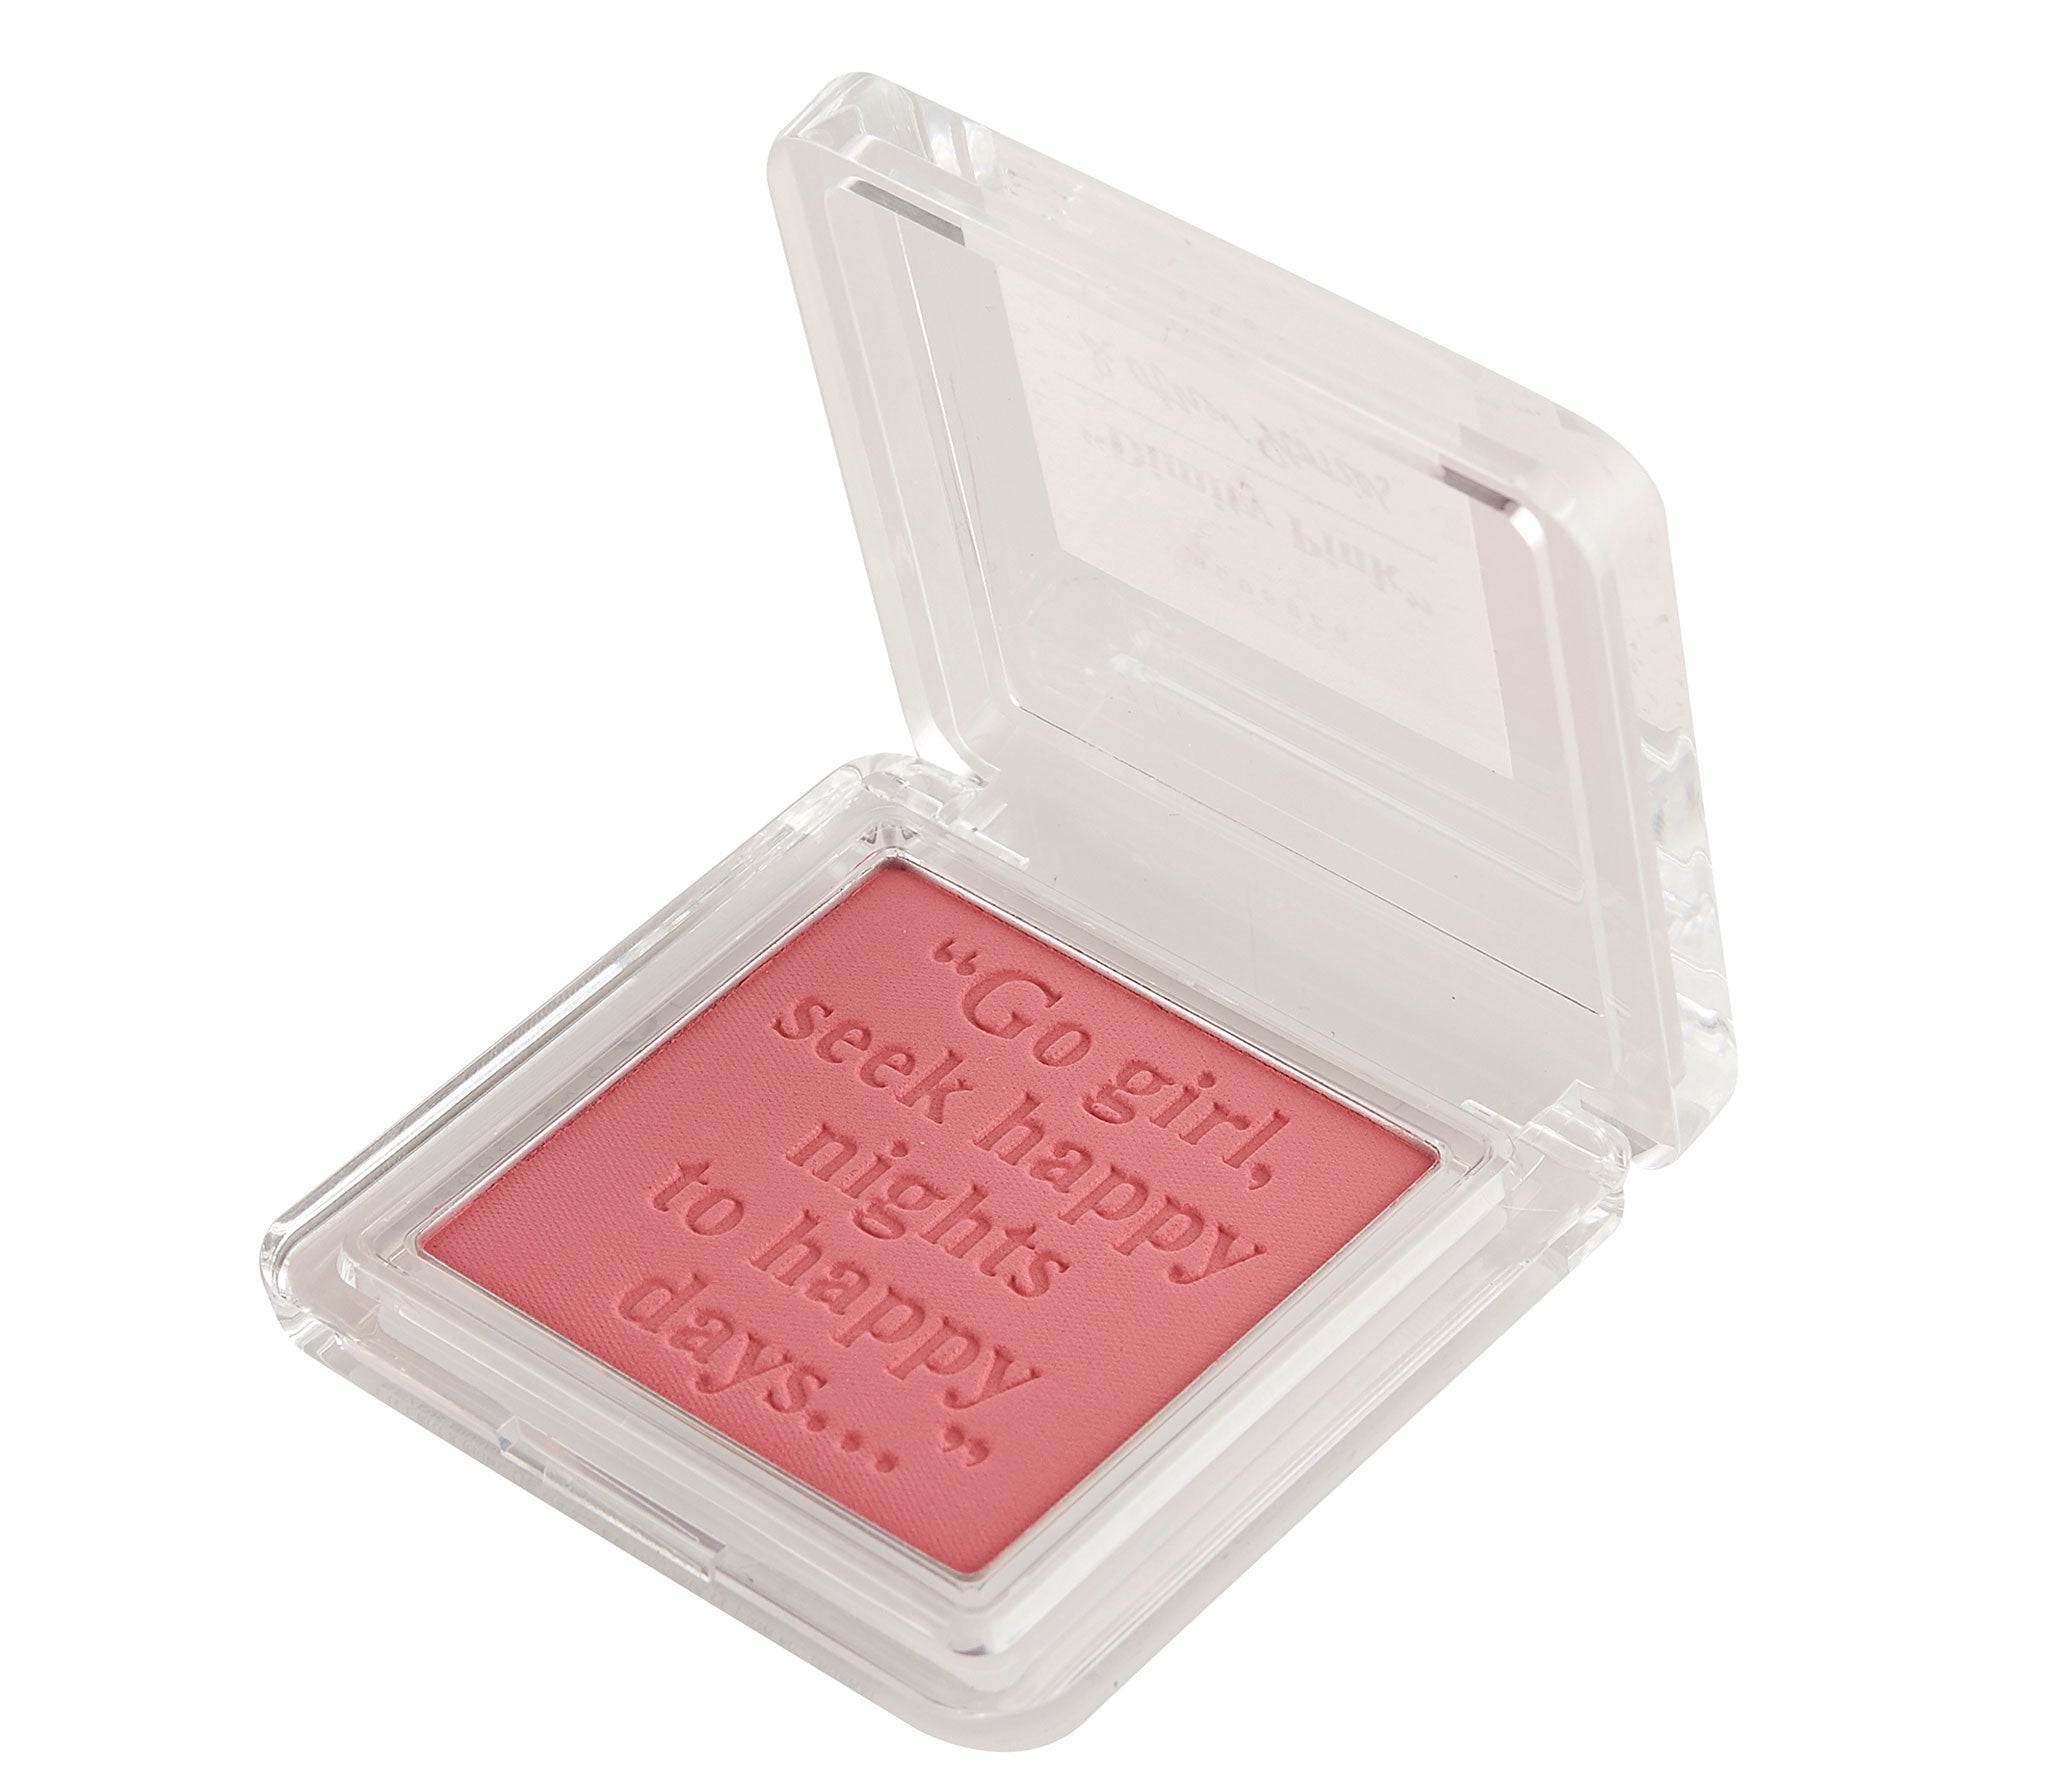 Blusher in Dimity pink, £10, & Other Stories, stories.com